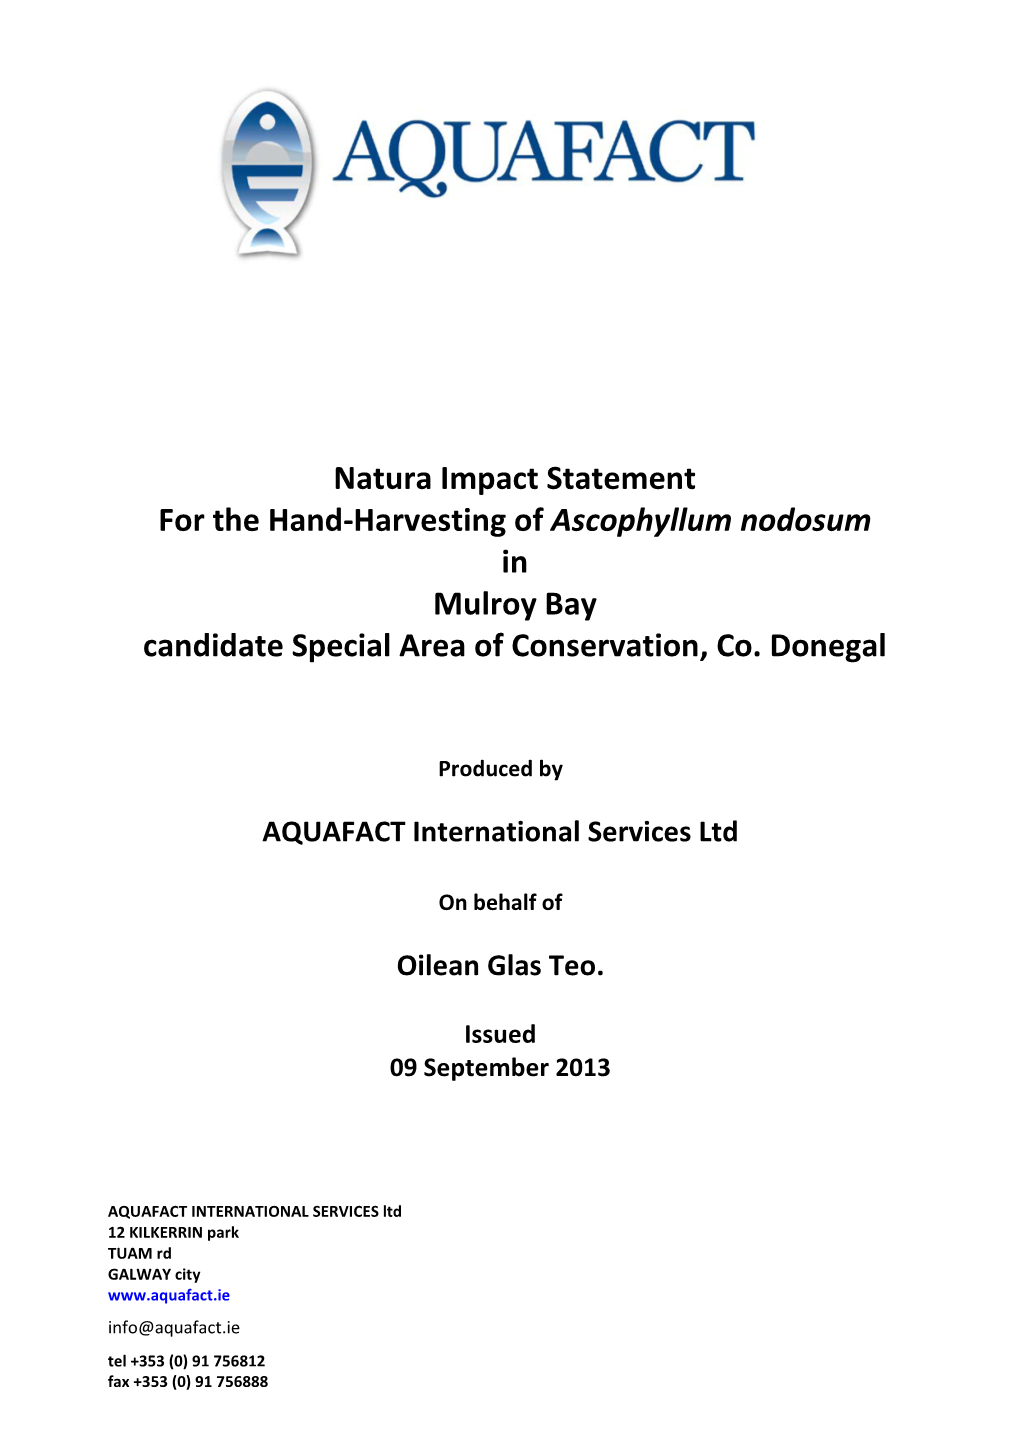 Natura Impact Statement for the Hand-Harvesting of Ascophyllum Nodosum in Mulroy Bay Candidate Special Area of Conservation, Co